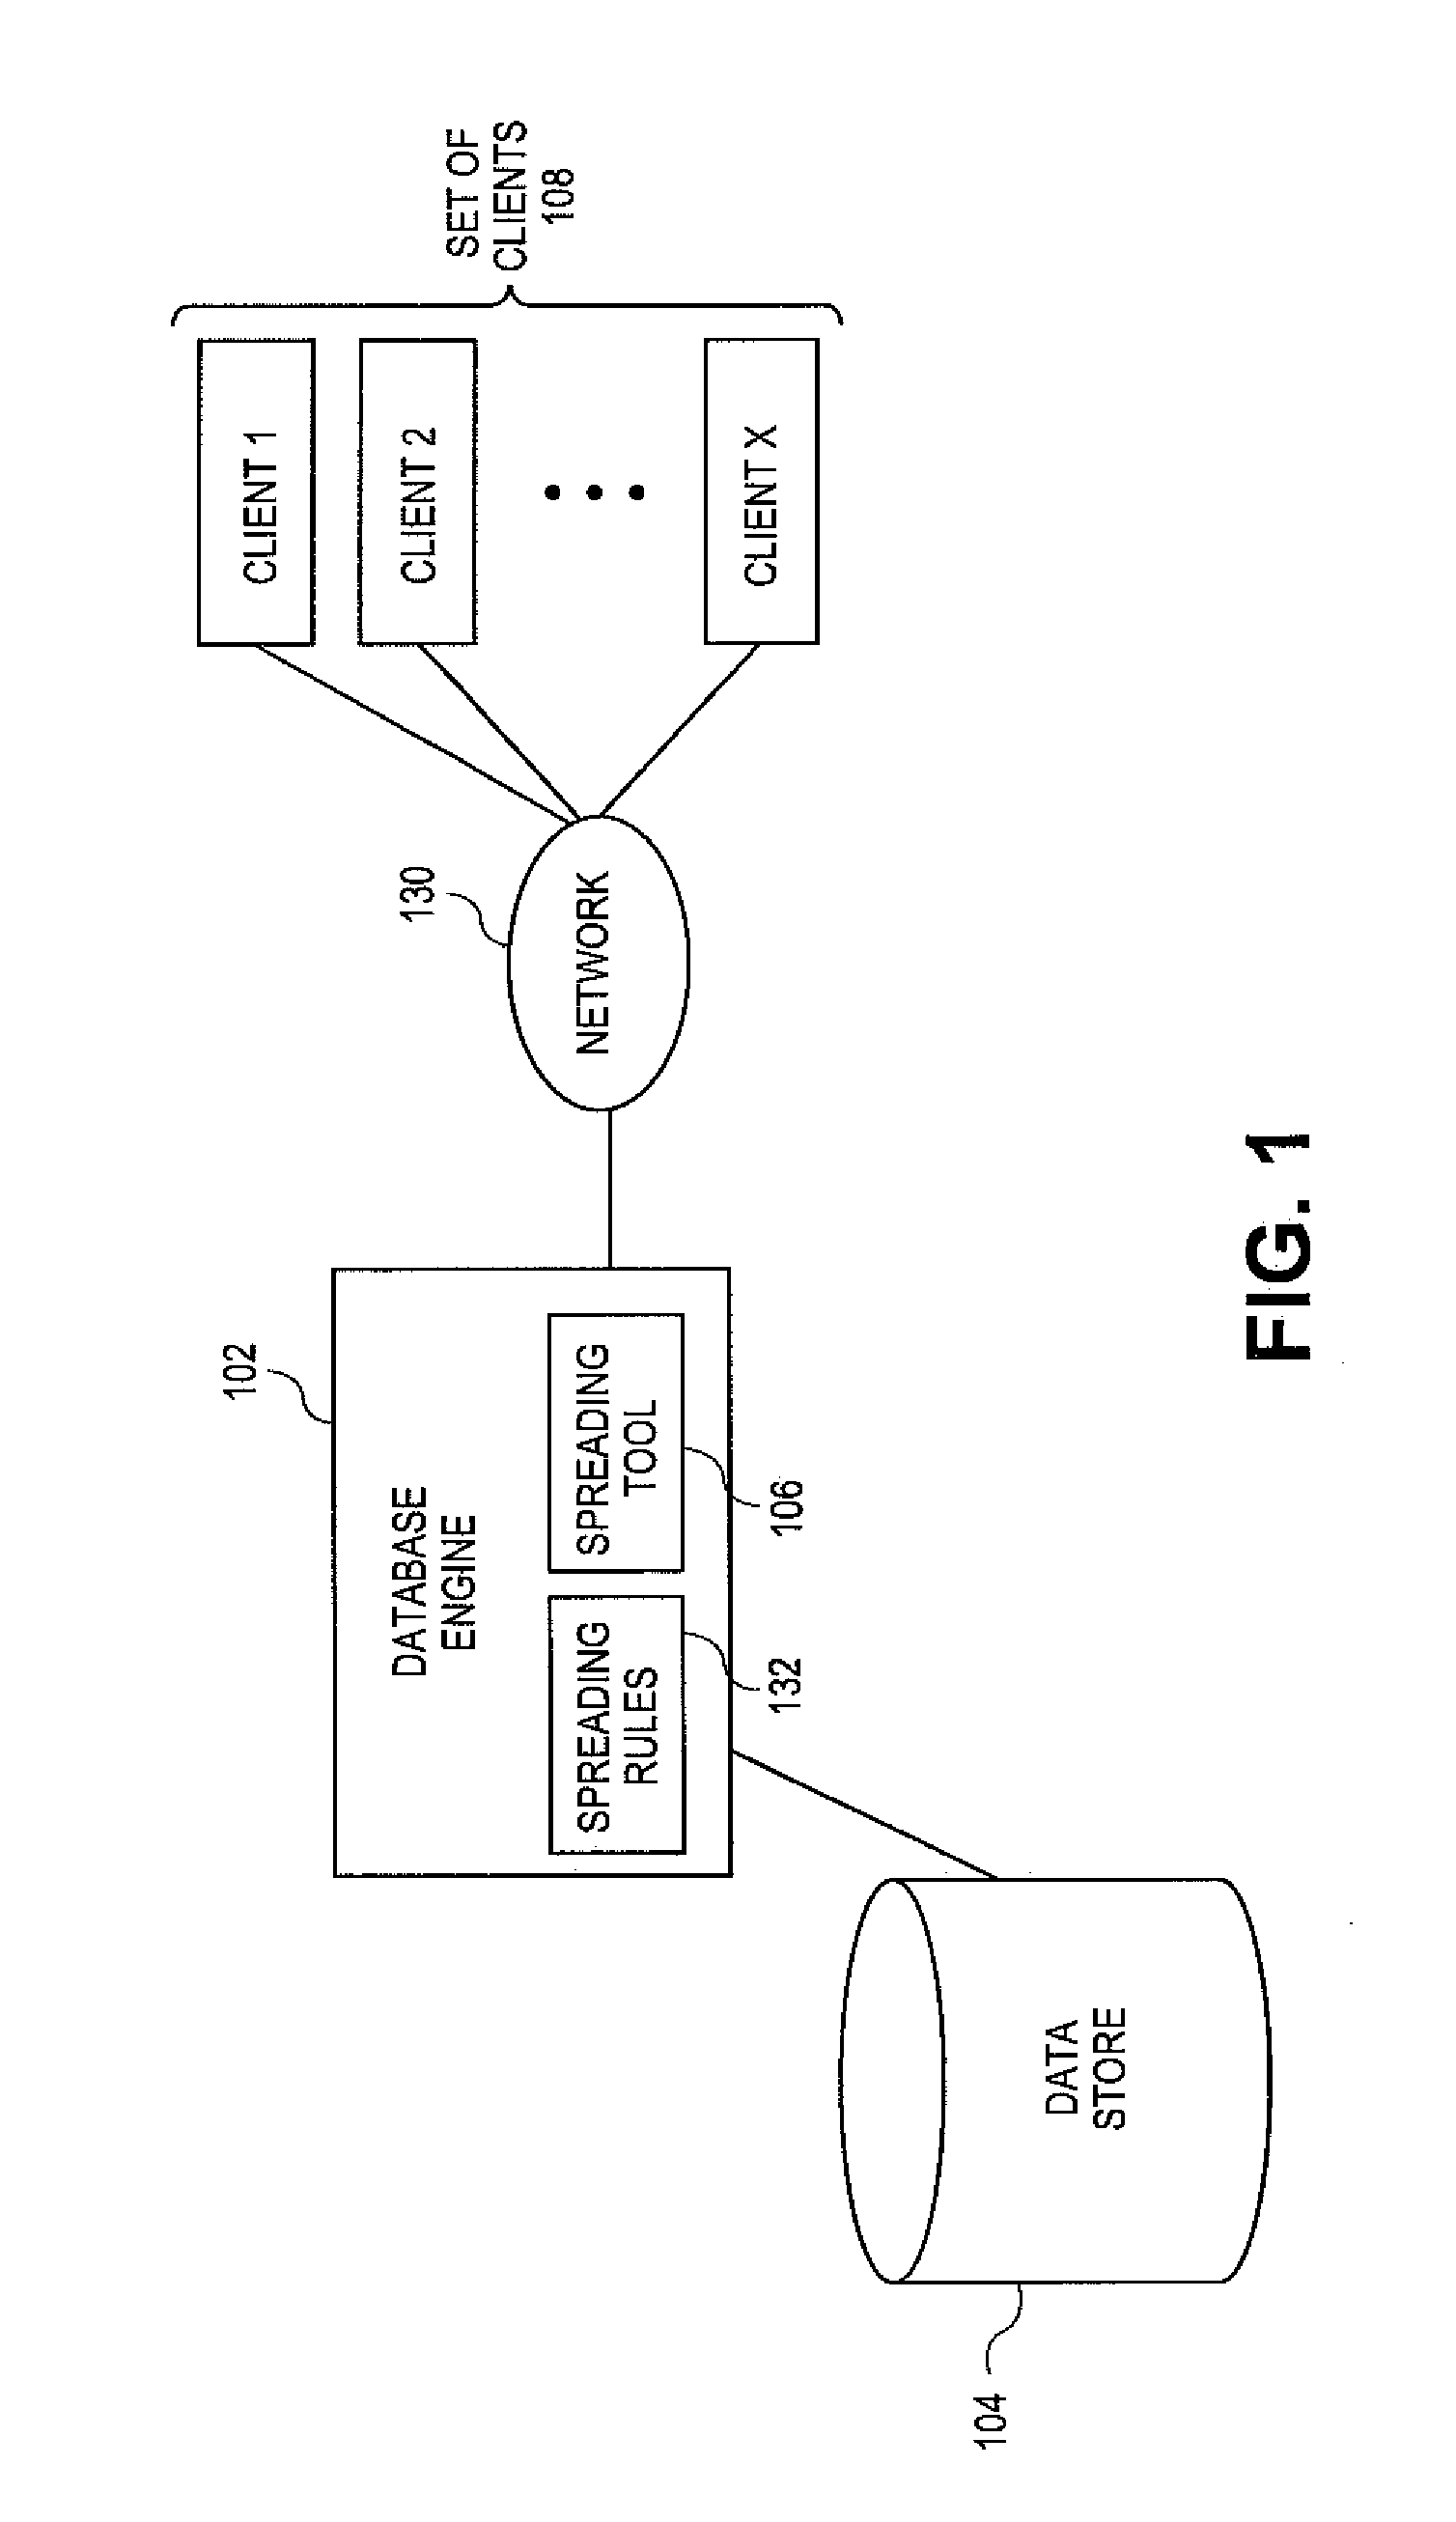 Systems and methods for generating iterated distributions of data in a hierarchical database